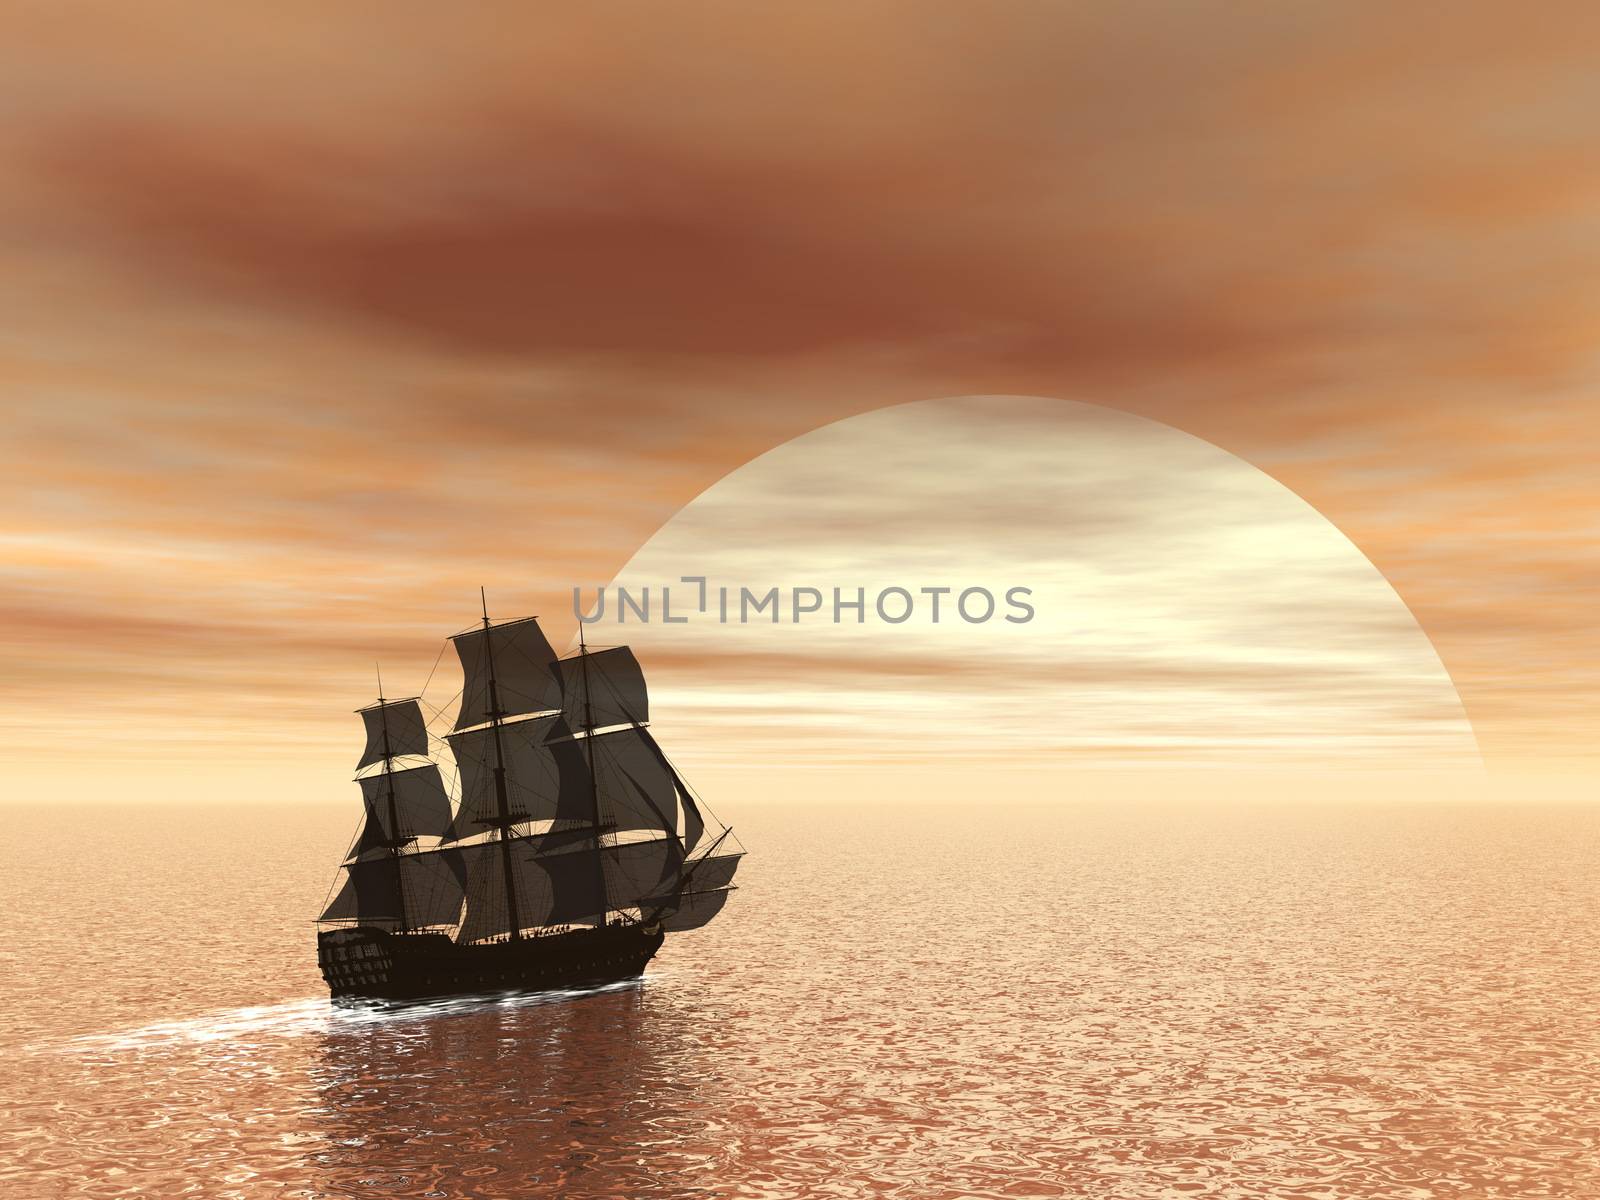 Old ship HSM Victory - 3D render by Elenaphotos21